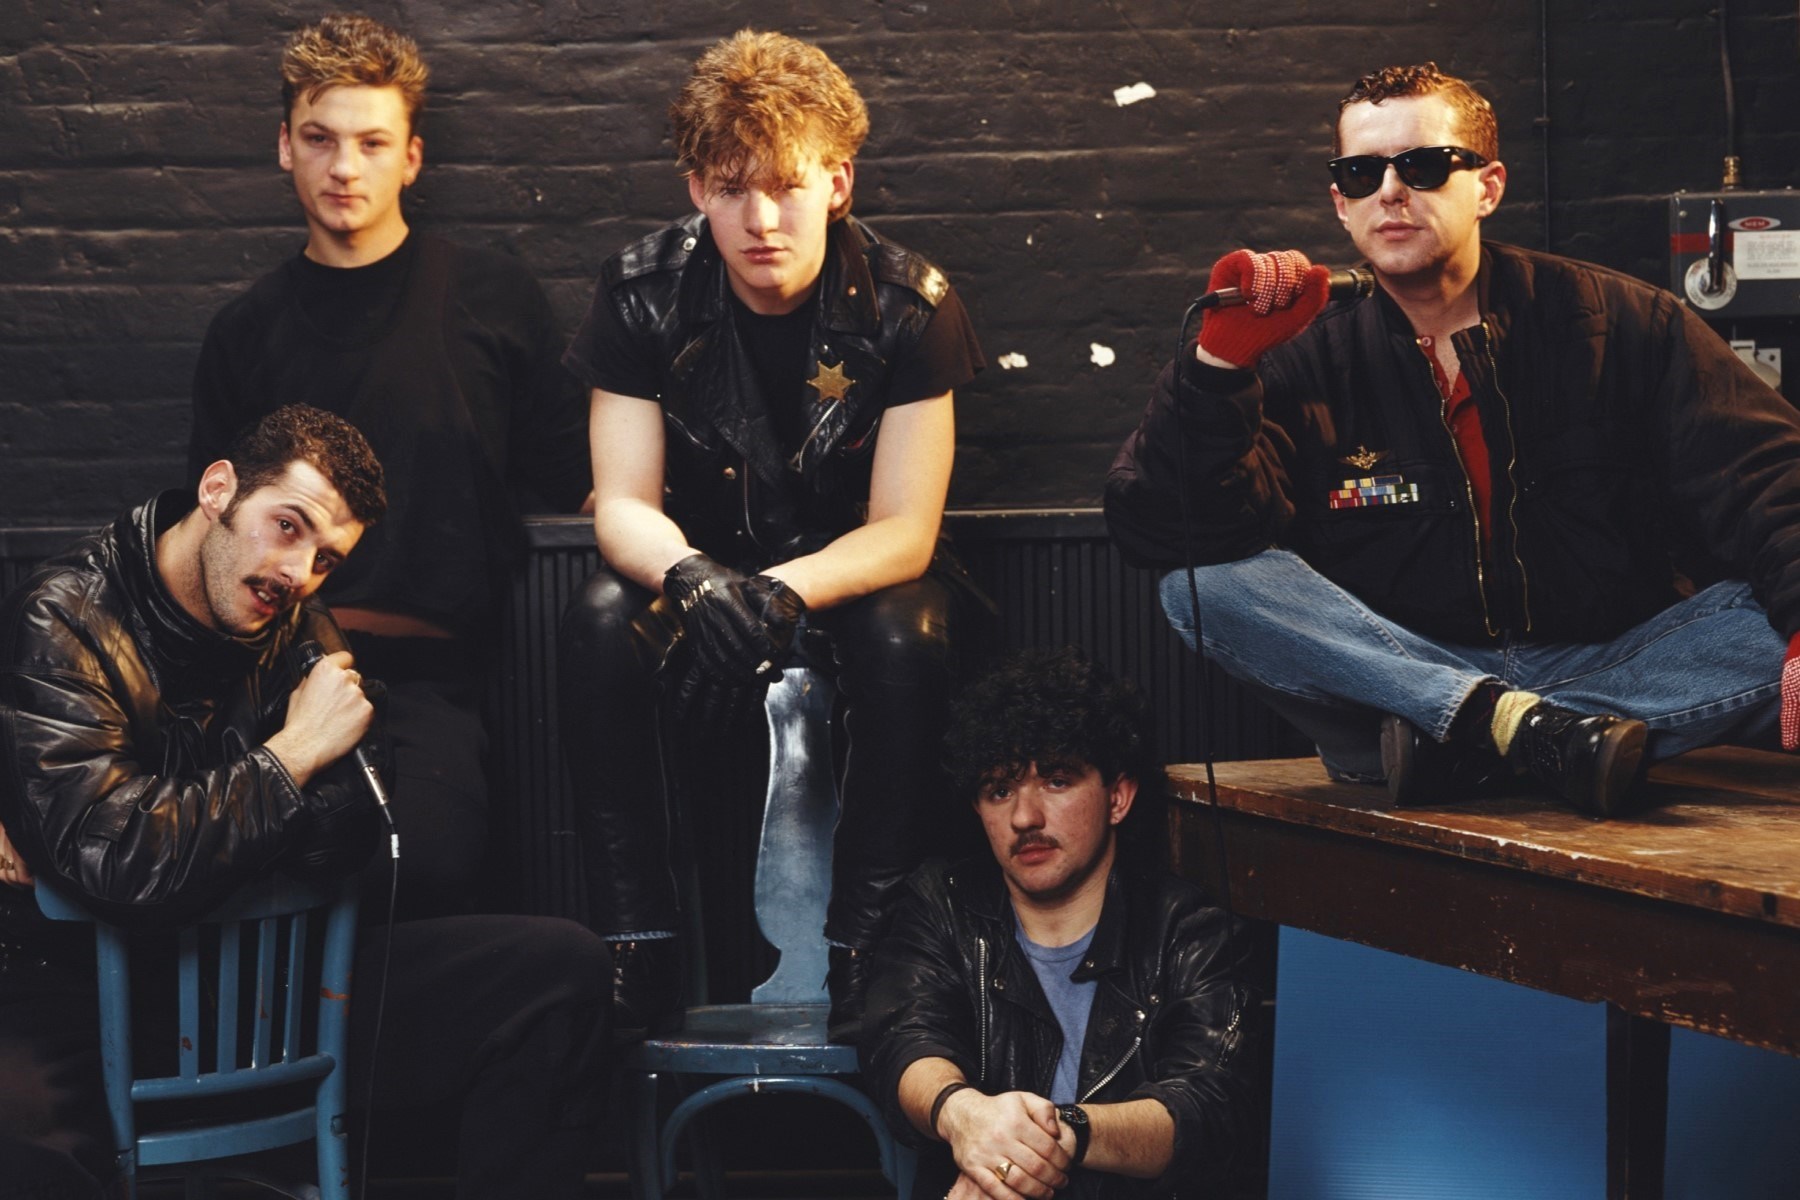 Unwind And Let Loose: The Mind-Blowing Lyrics Of ‘Relax’ By Frankie Goes To Hollywood!